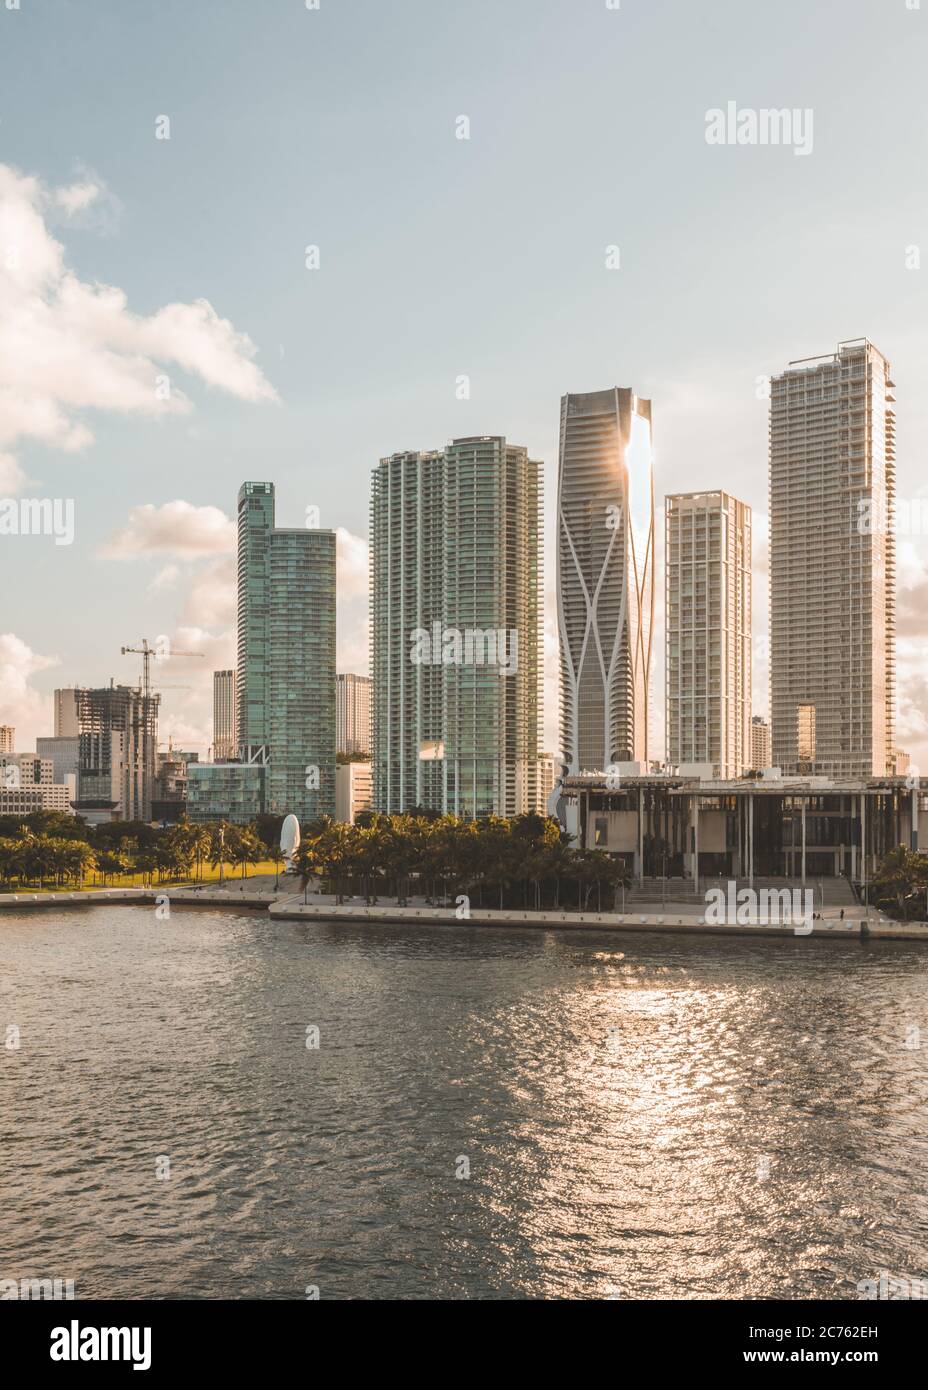 Downtown Miami skyline featuring the Perez Art Museum and the One Thousand Museum Stock Photo